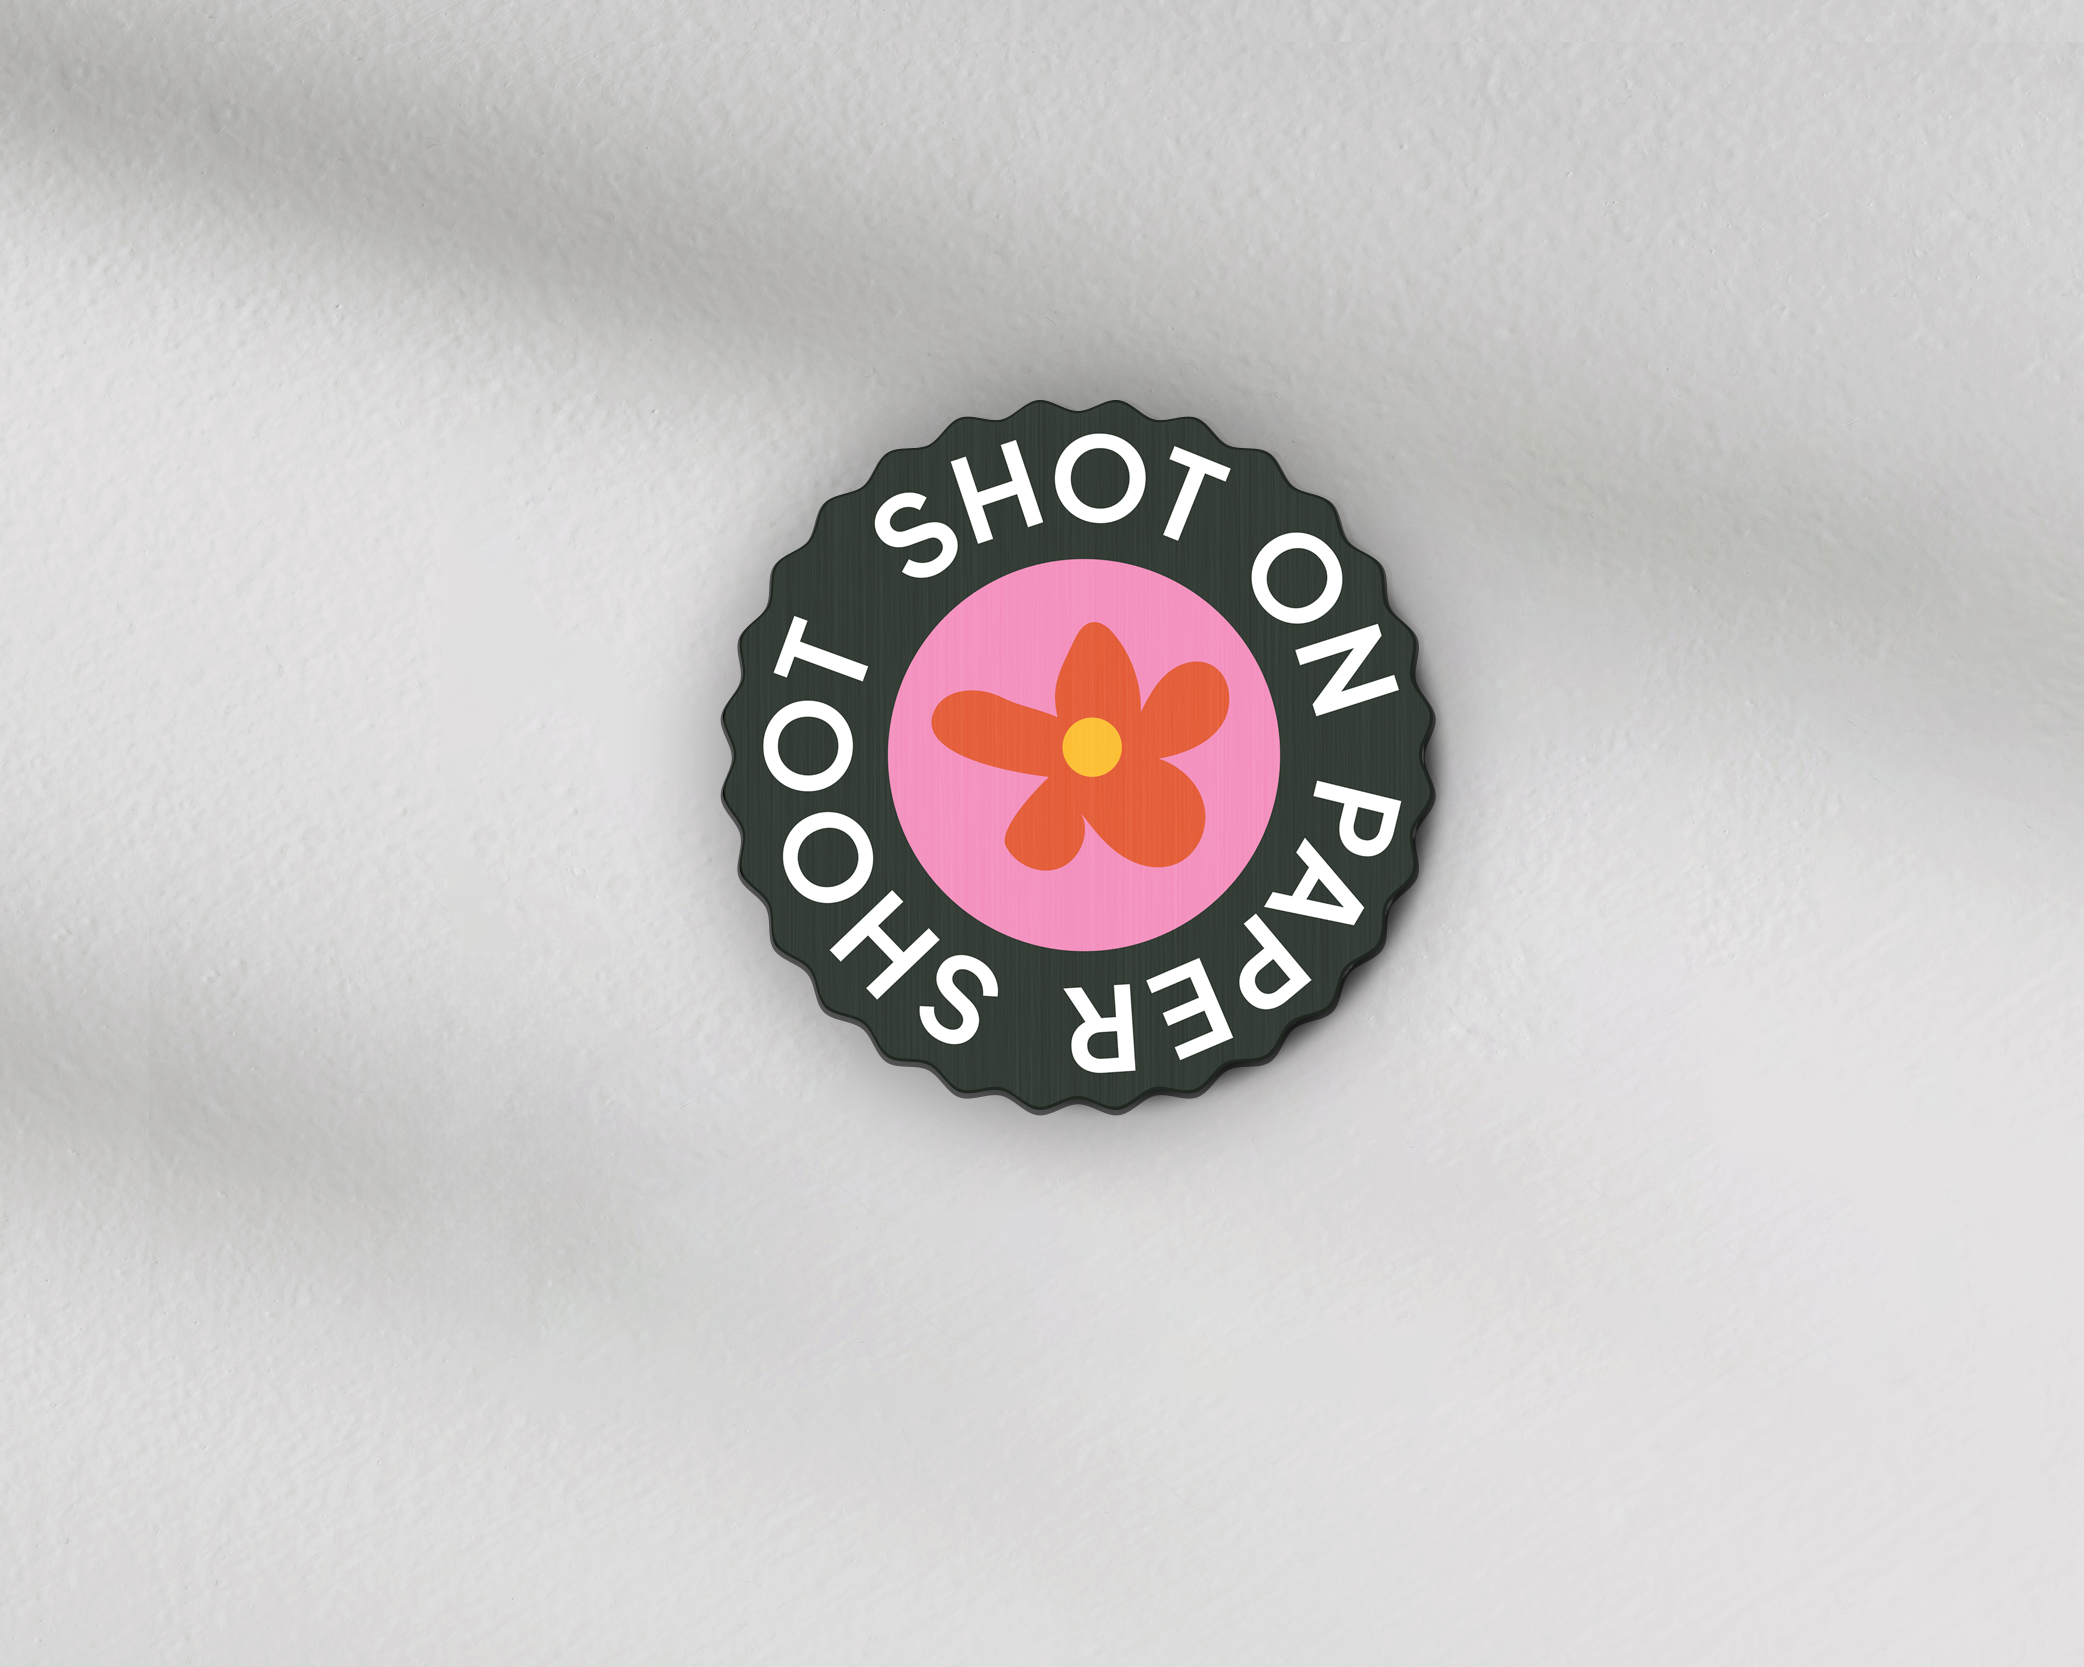 Shot on paper shoot text lens cover with centre red and yellow flower graphic with grip groves 